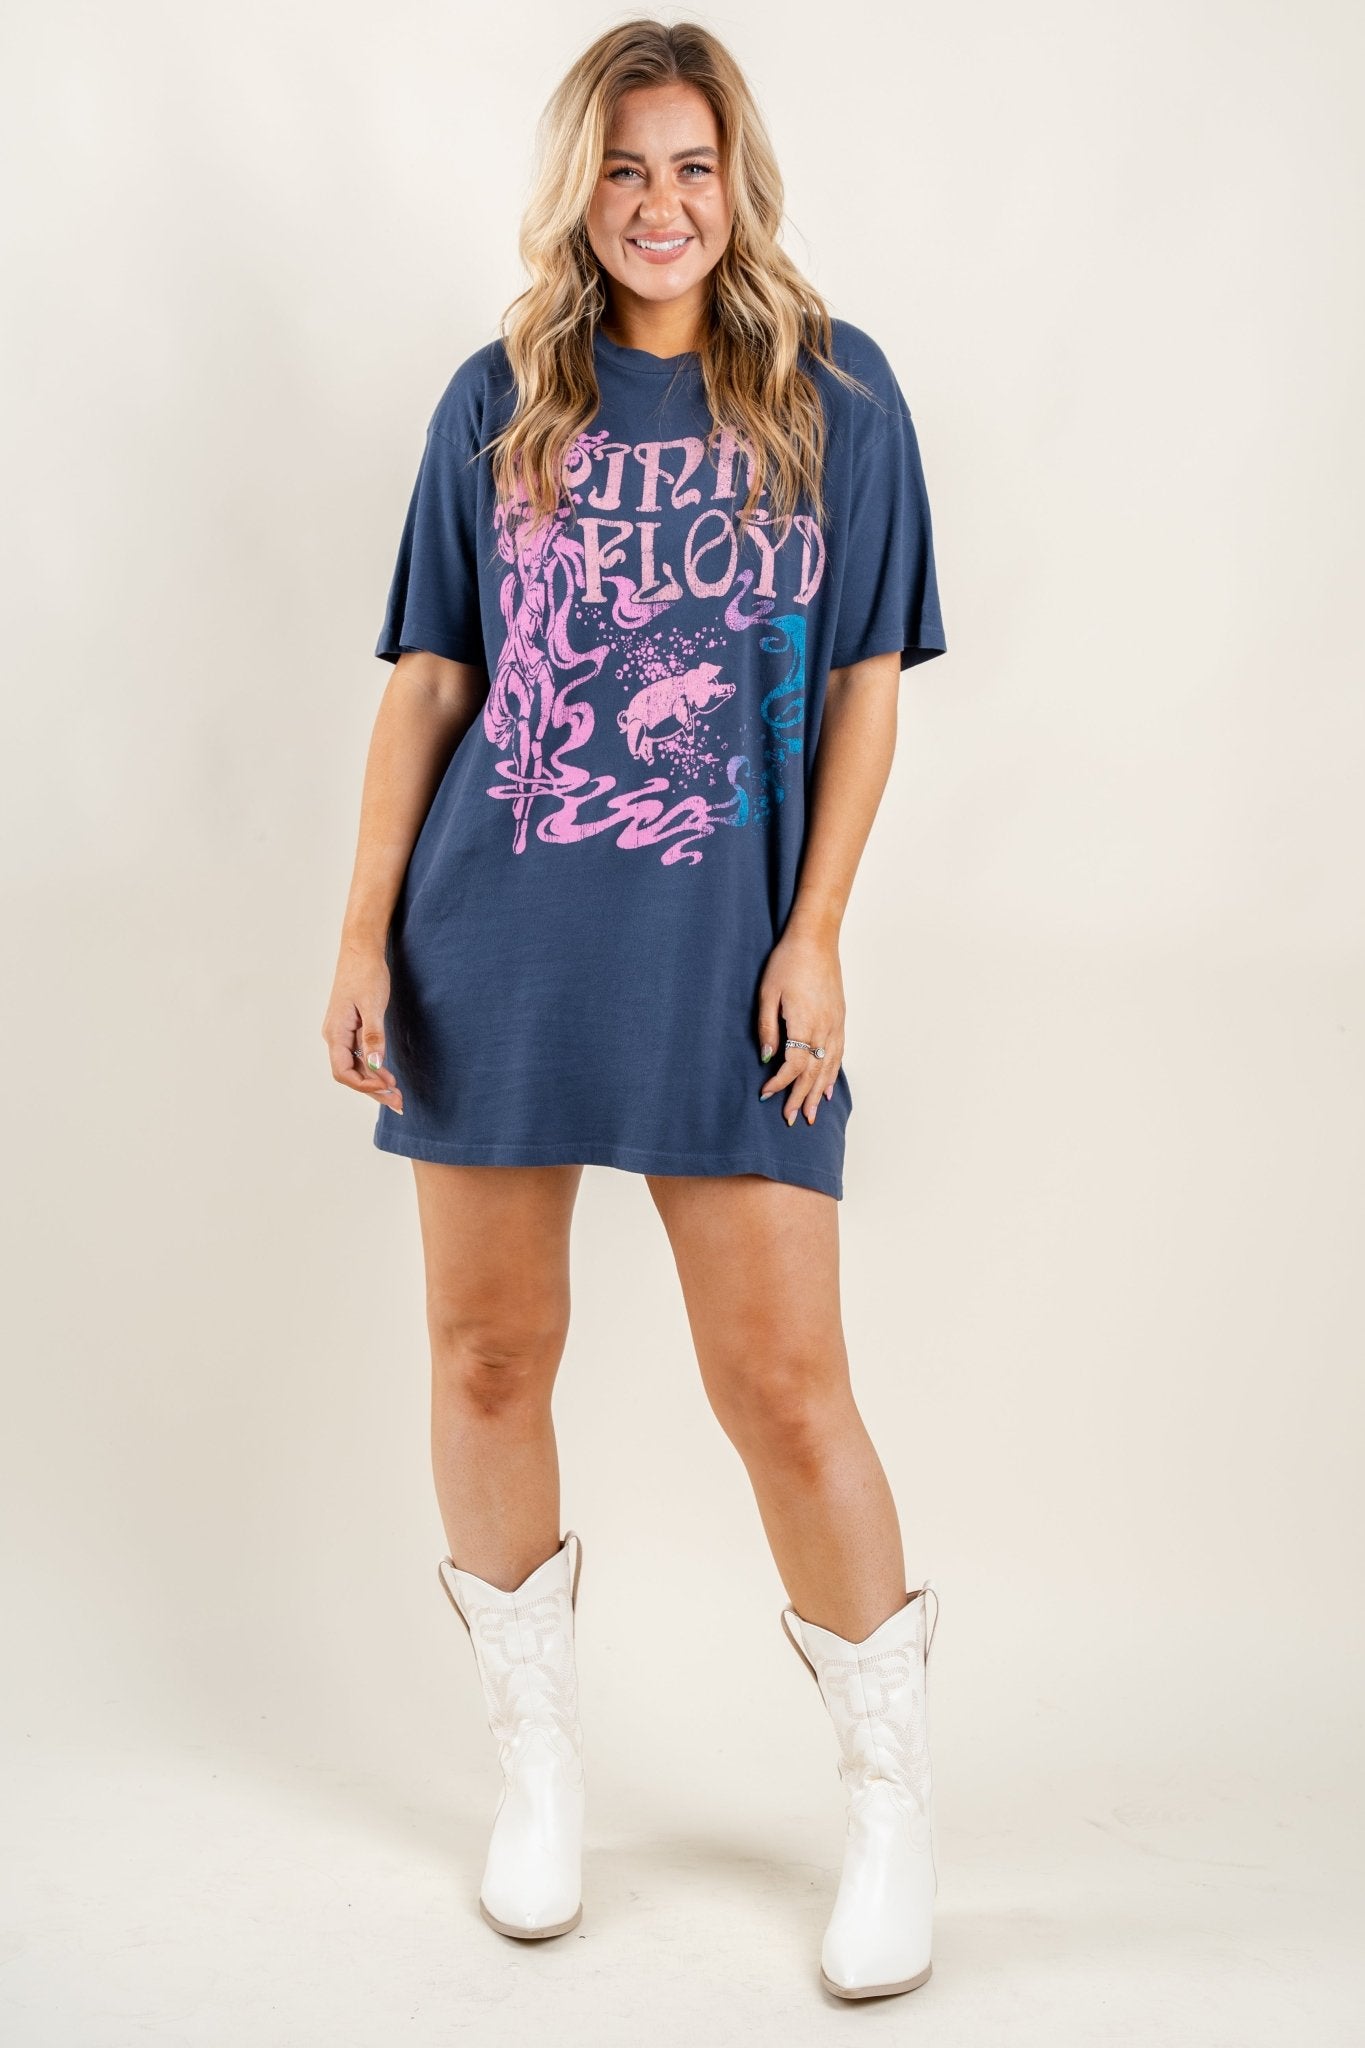 DayDreamer Pink Floyd t-shirt dress navy - Vintage Band T-Shirts and Sweatshirts at Lush Fashion Lounge Boutique in Oklahoma City